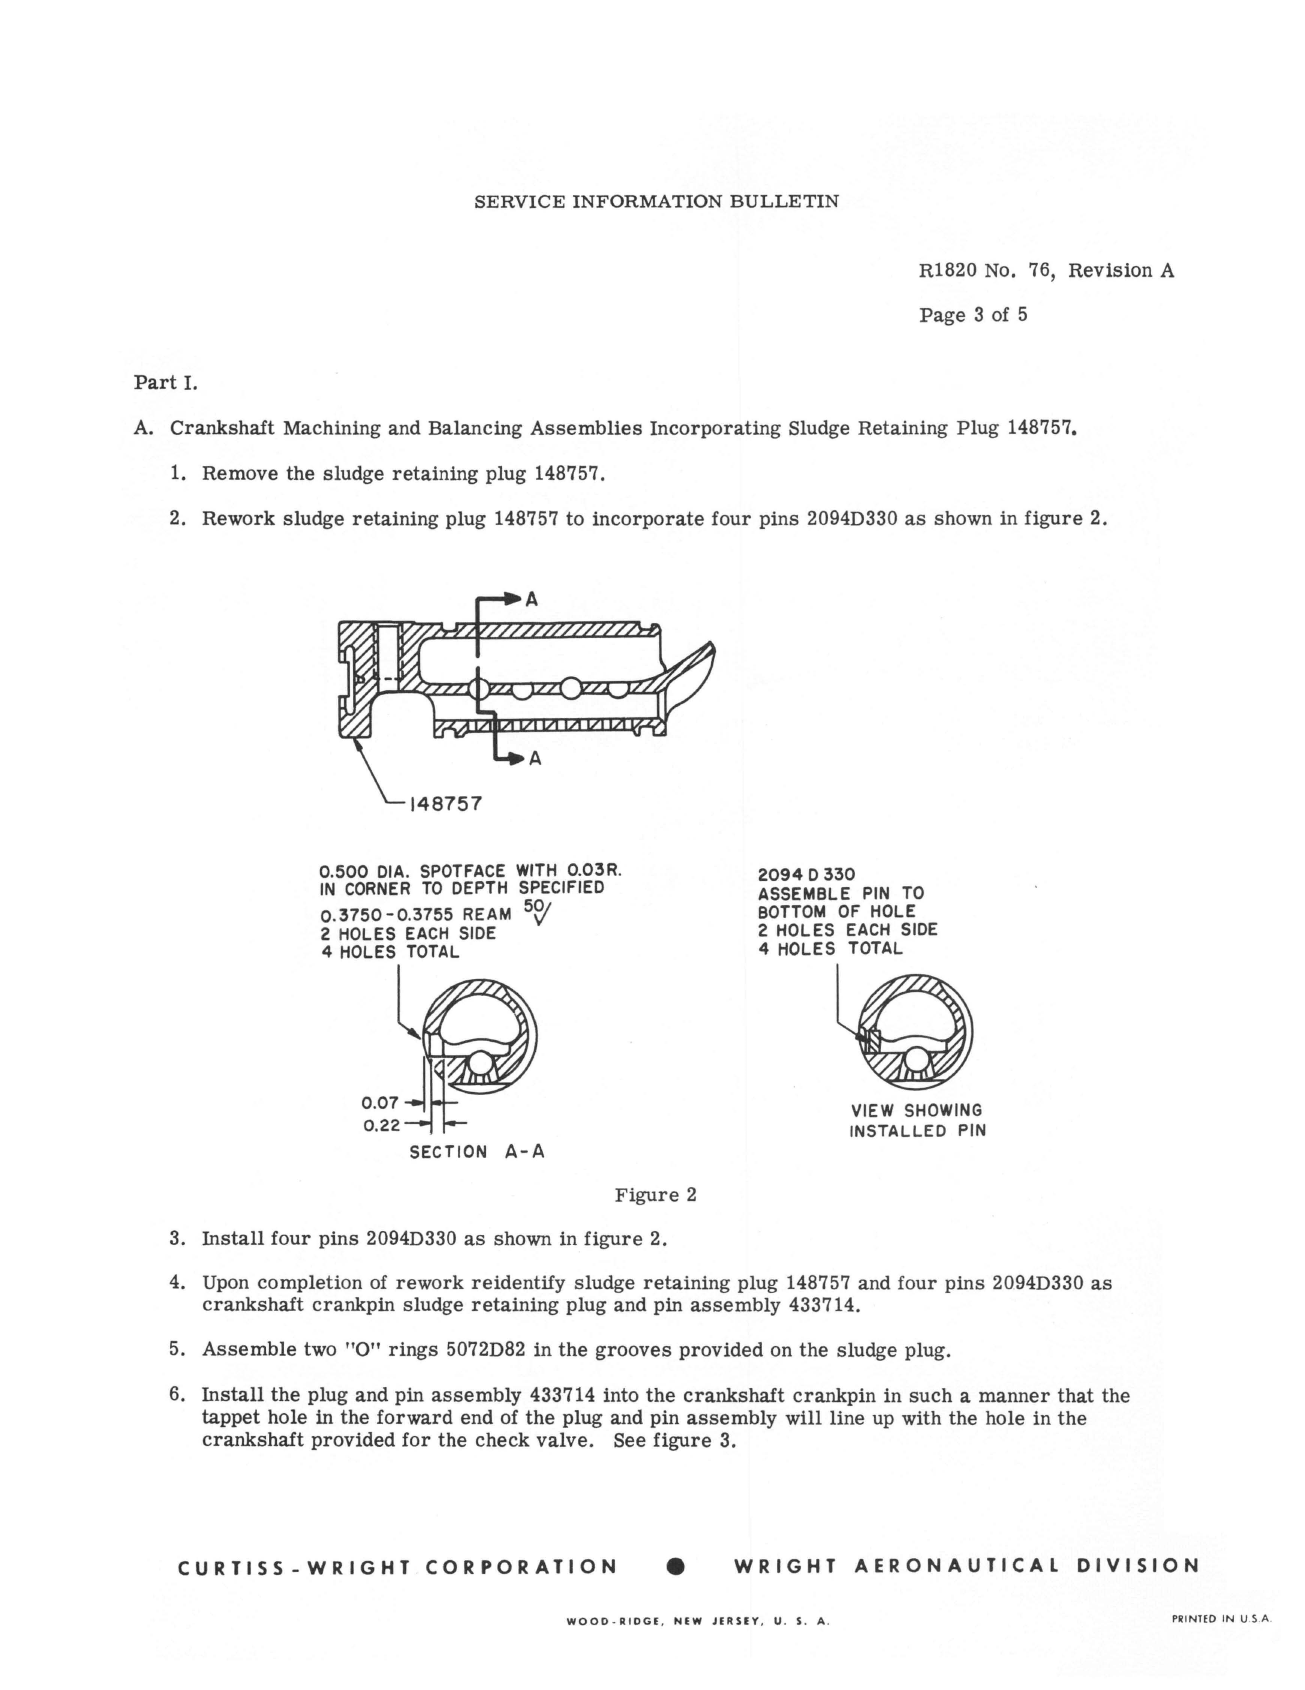 Sample page 3 from AirCorps Library document: Provision for Crankshaft Crankpin Sludge Retaining Plug & Pin Assembly